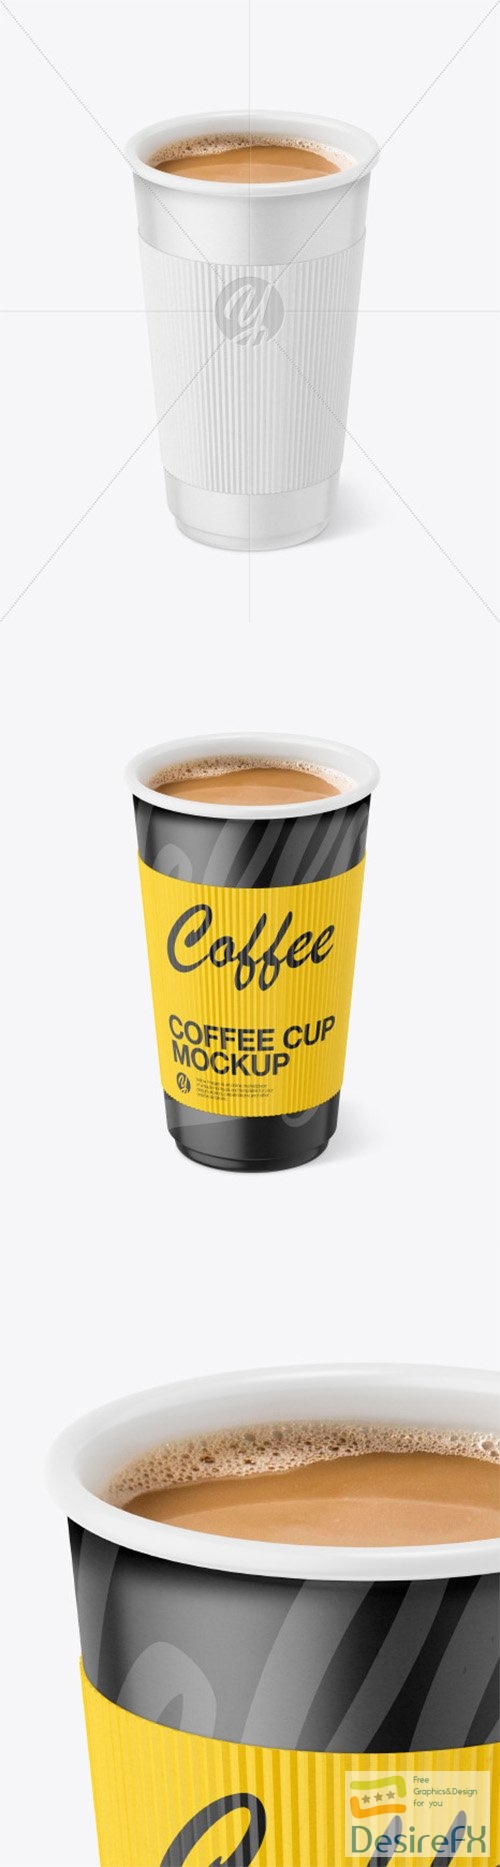 Paper Coffee Cup With Holder Mockup 78693 TIF